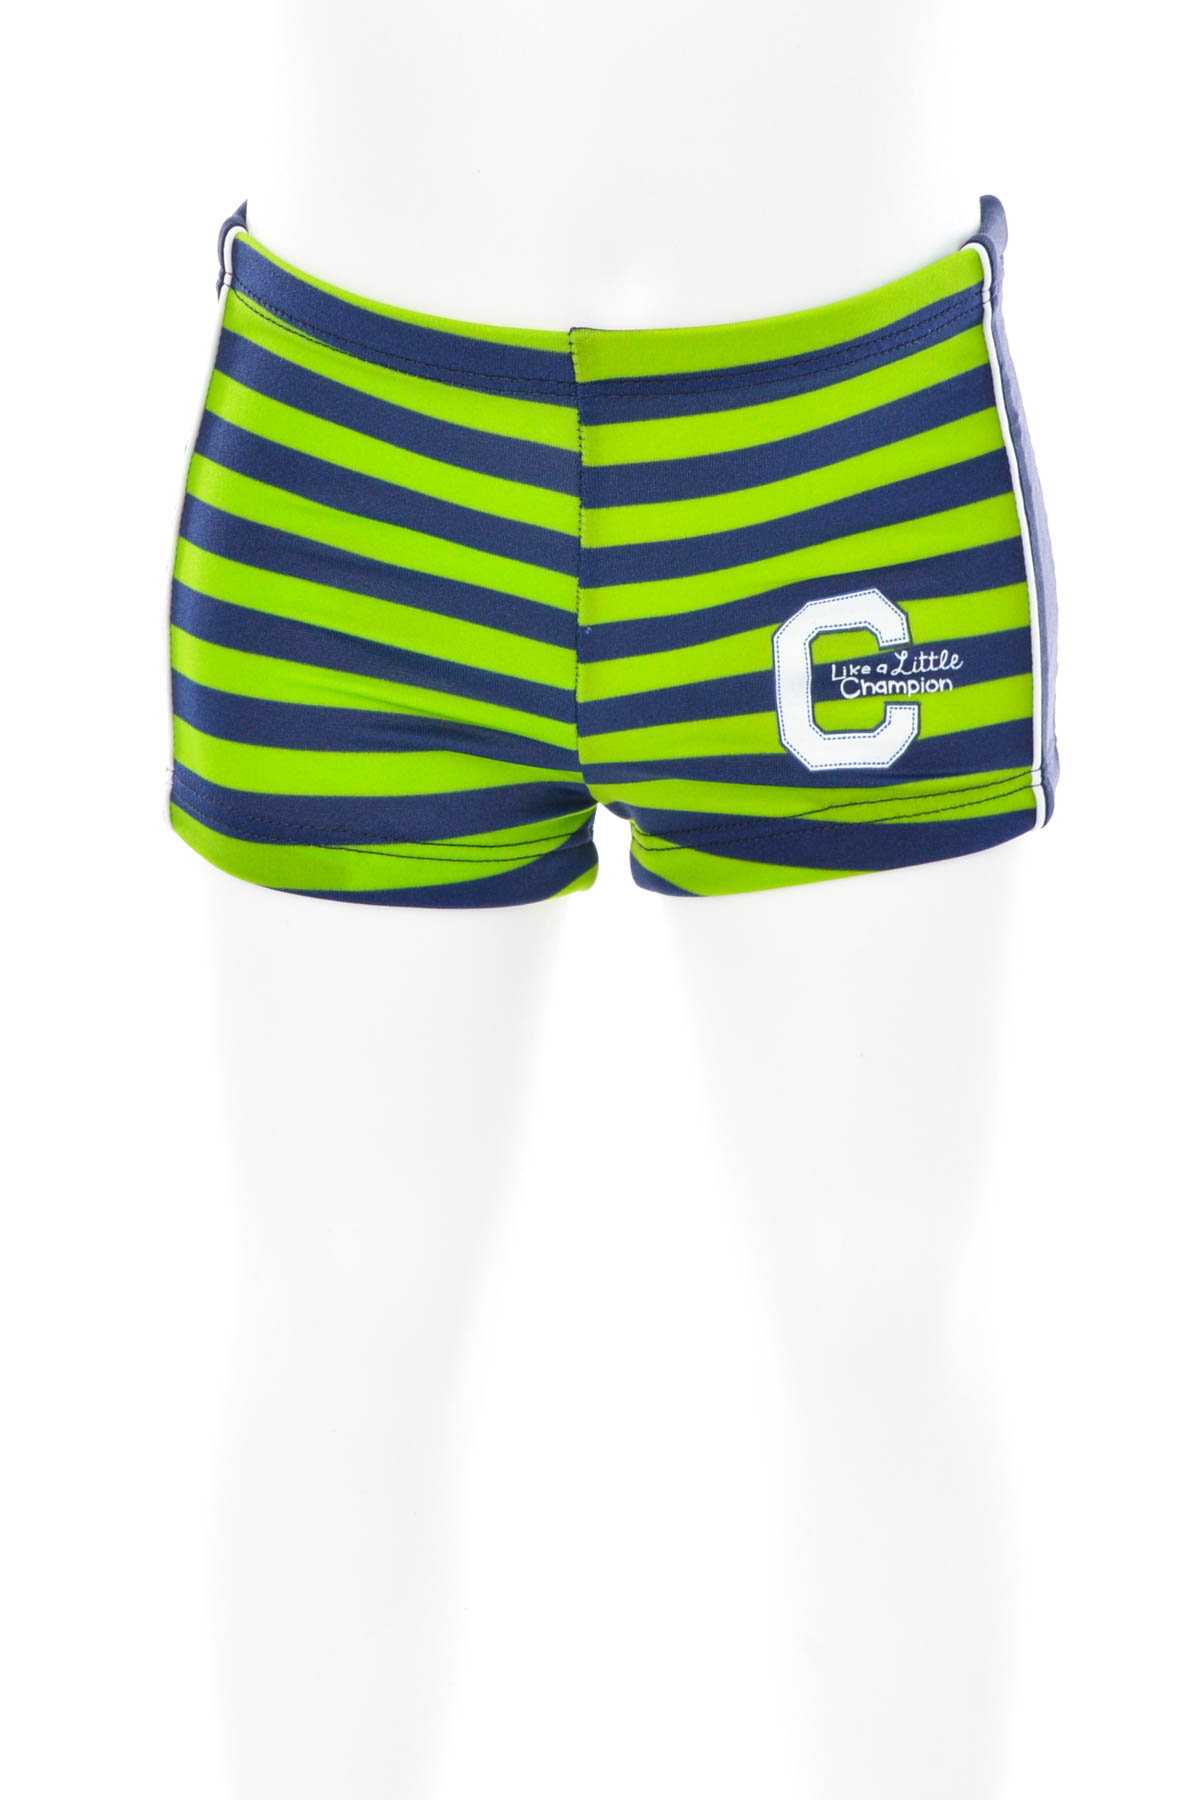 Baby swimsuit for boy - Champion - 0